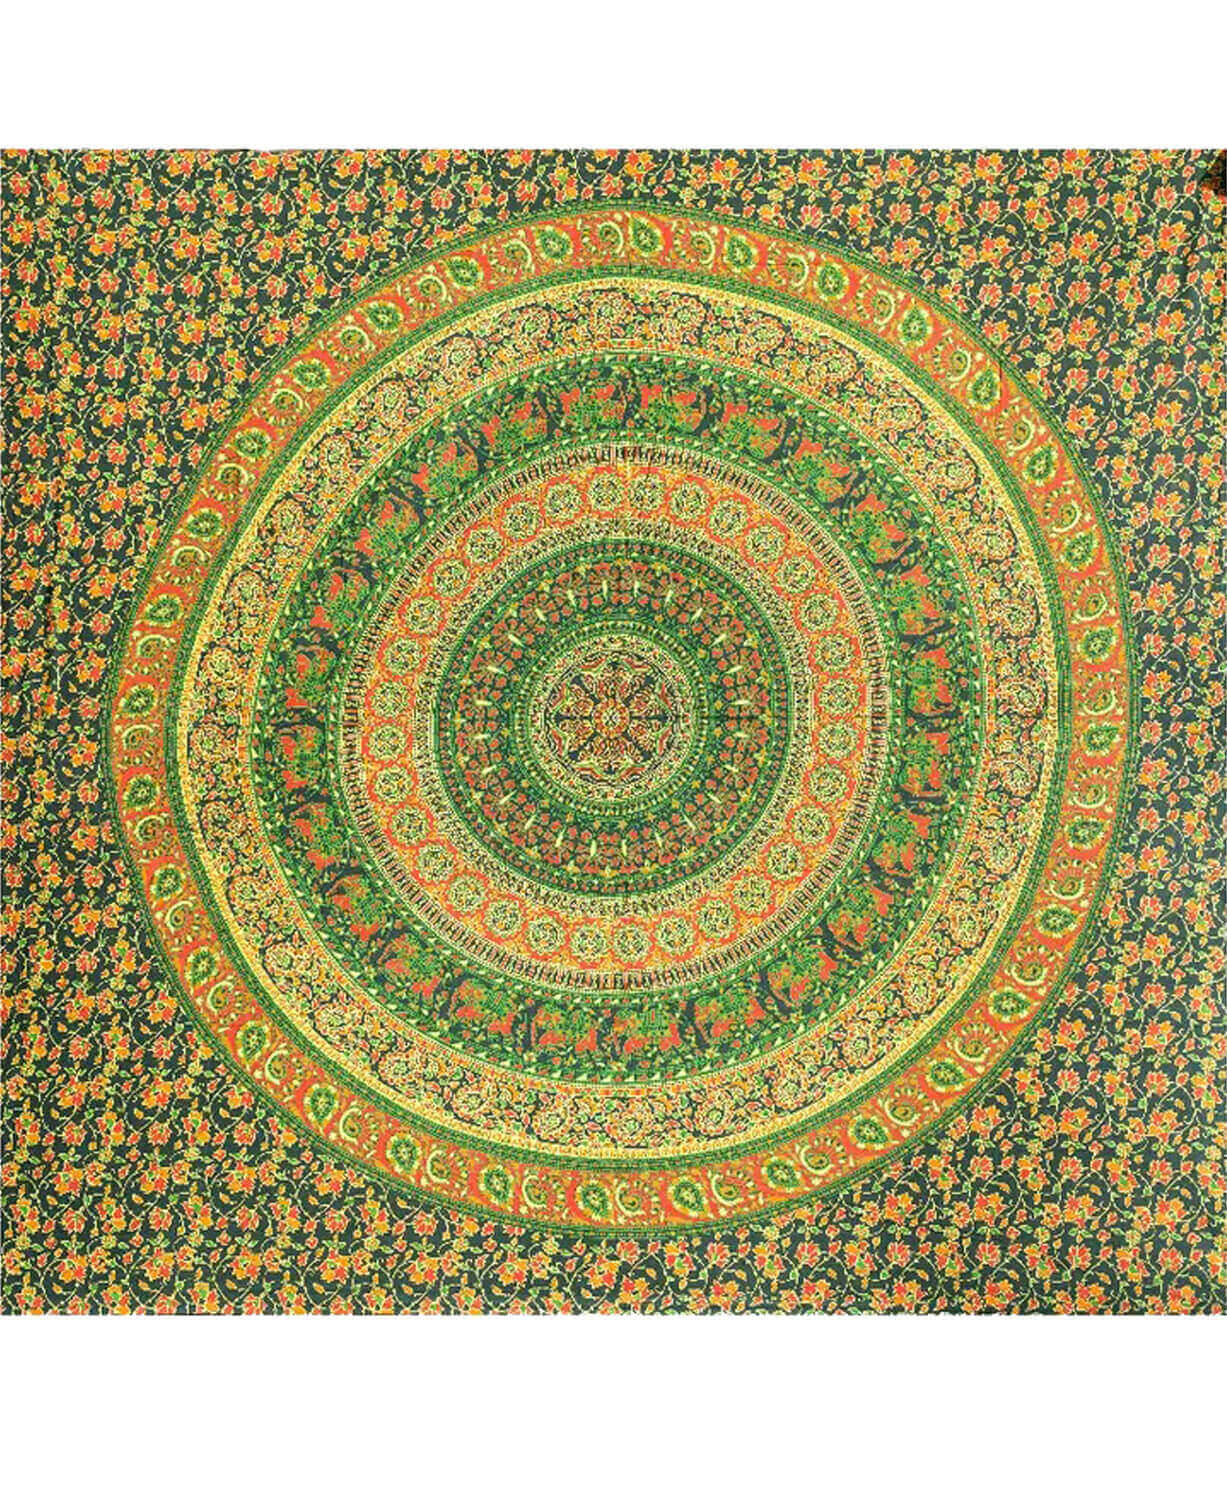 NEW! Green Elephant Tapestry (Double)